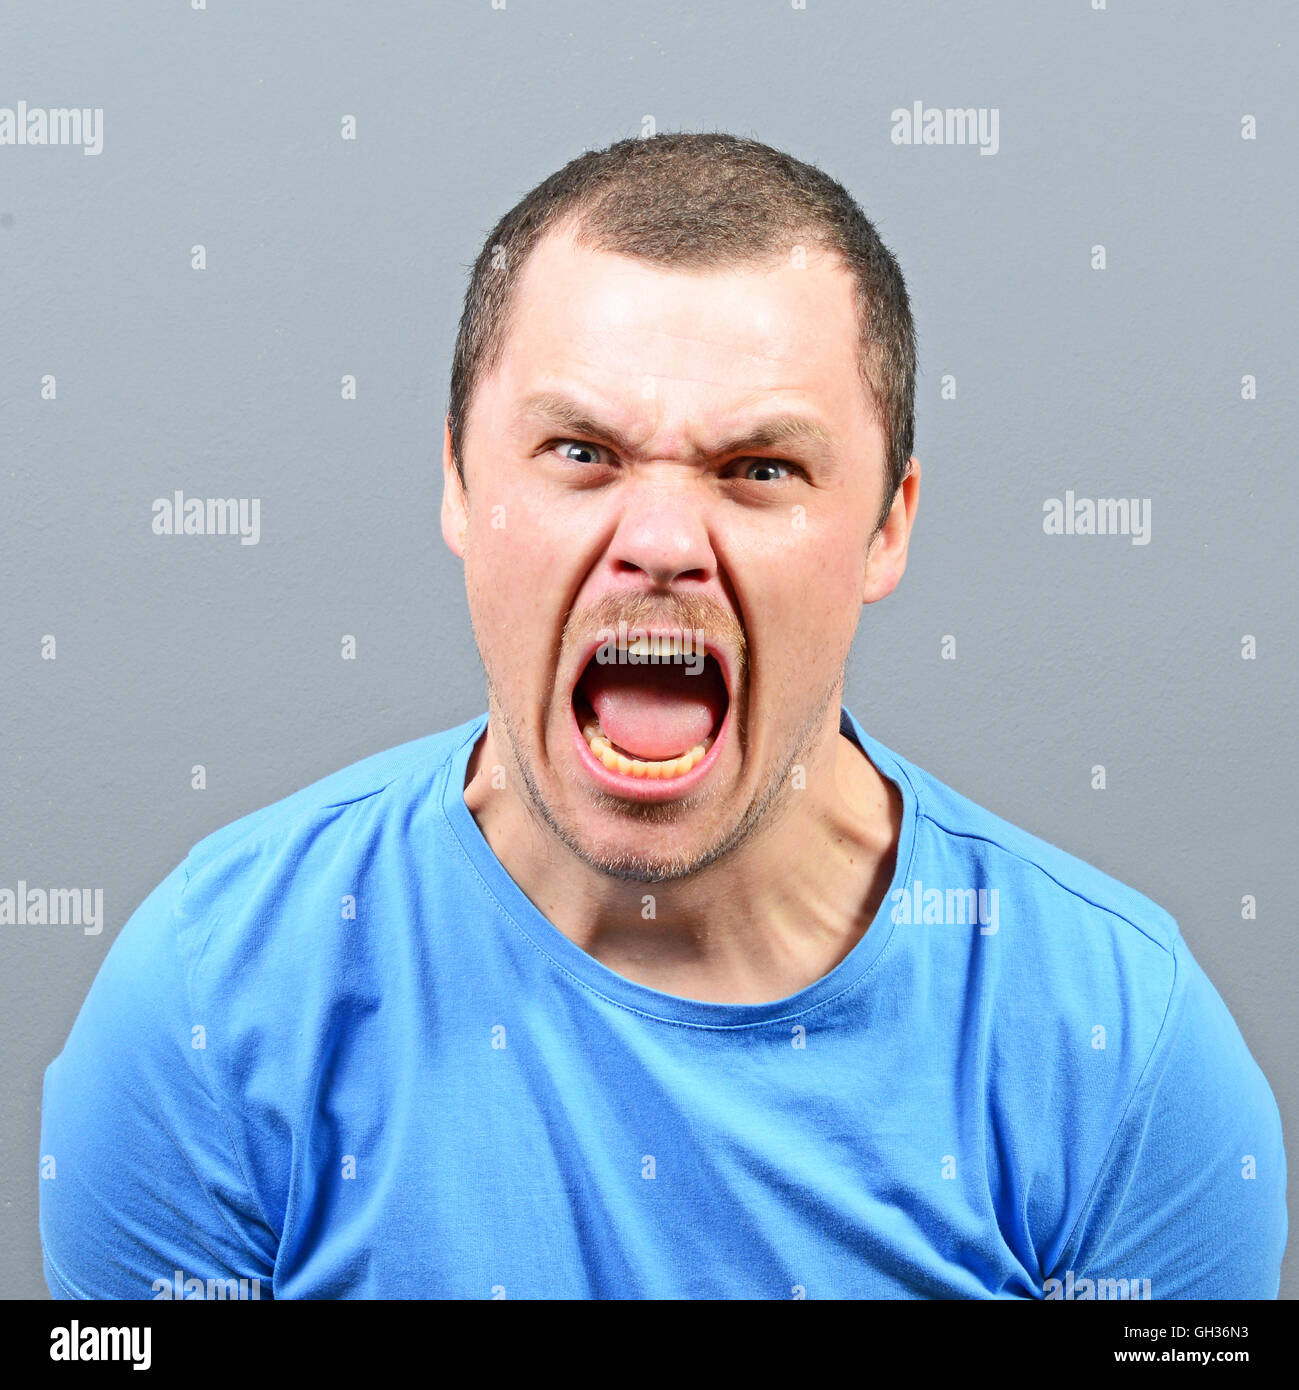 angry person